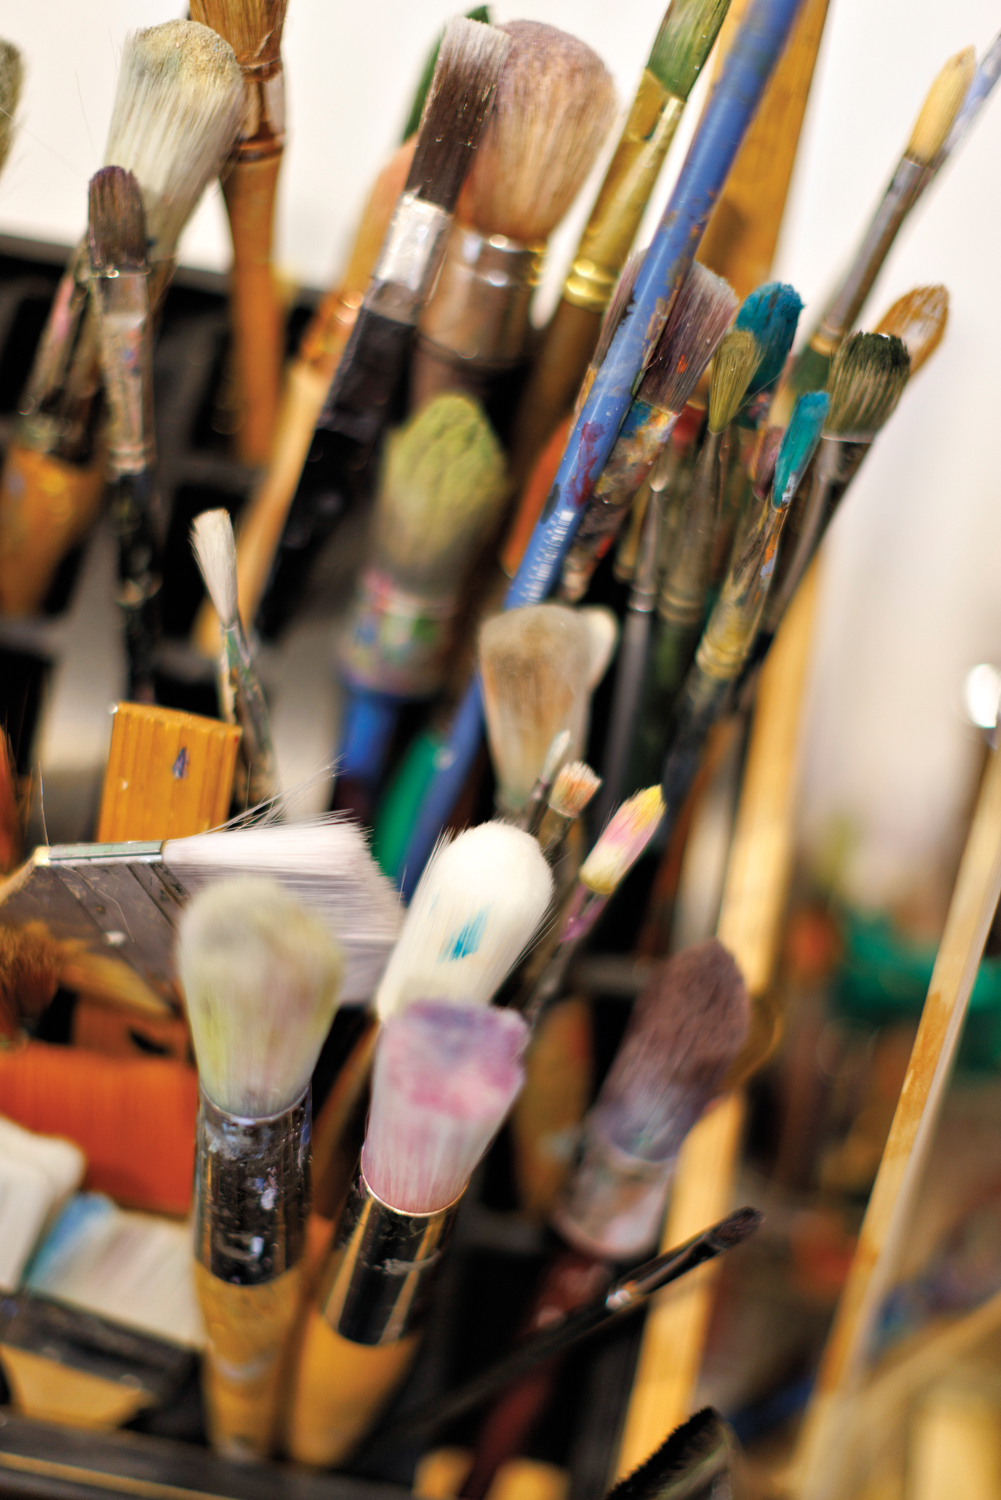 collection of paintbrushes in carmelo blandino's studio